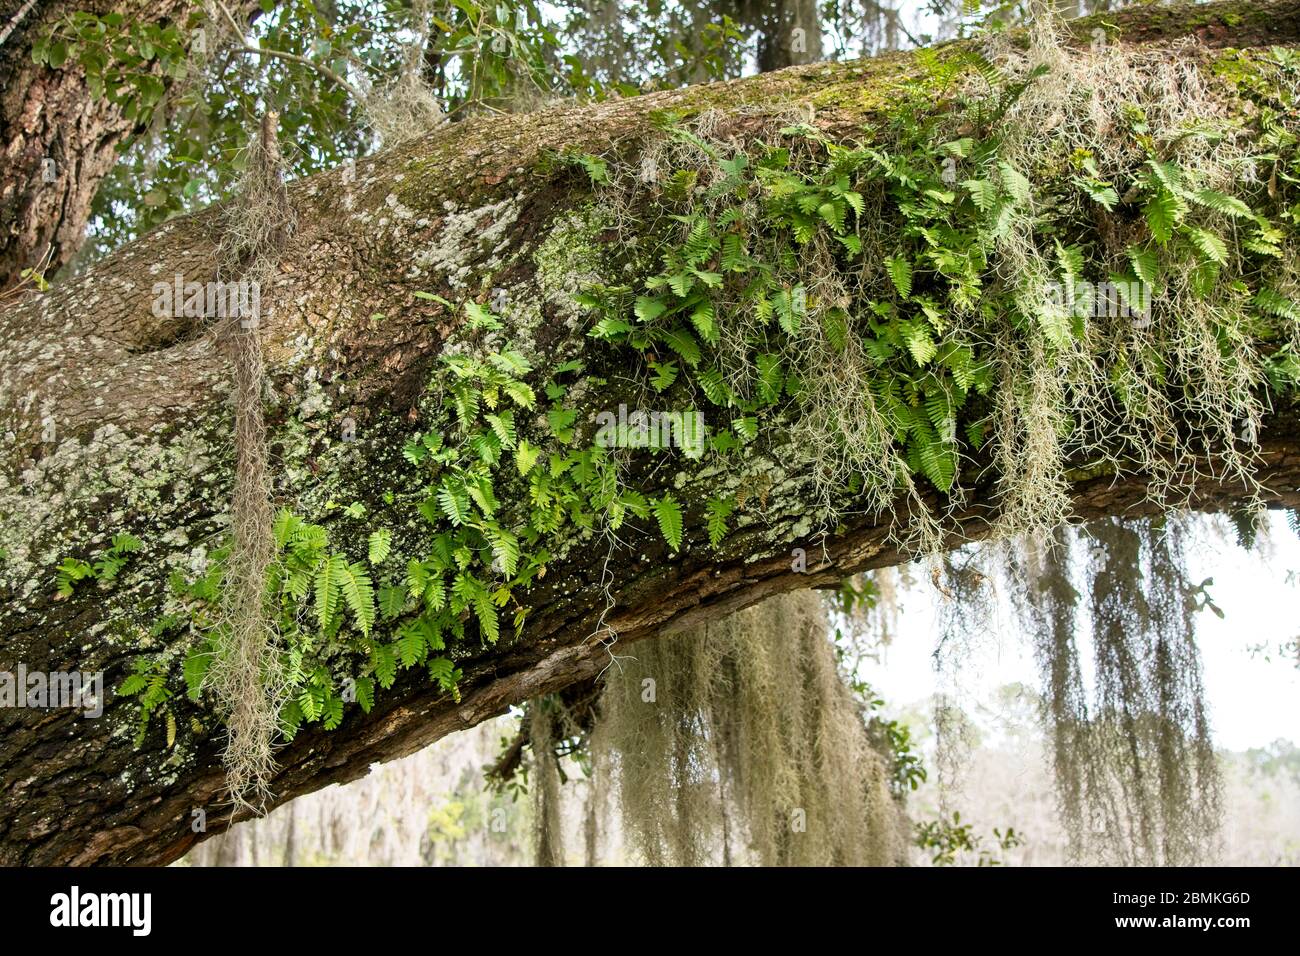 Spanish moss and ferns on tree trunk Stock Photo